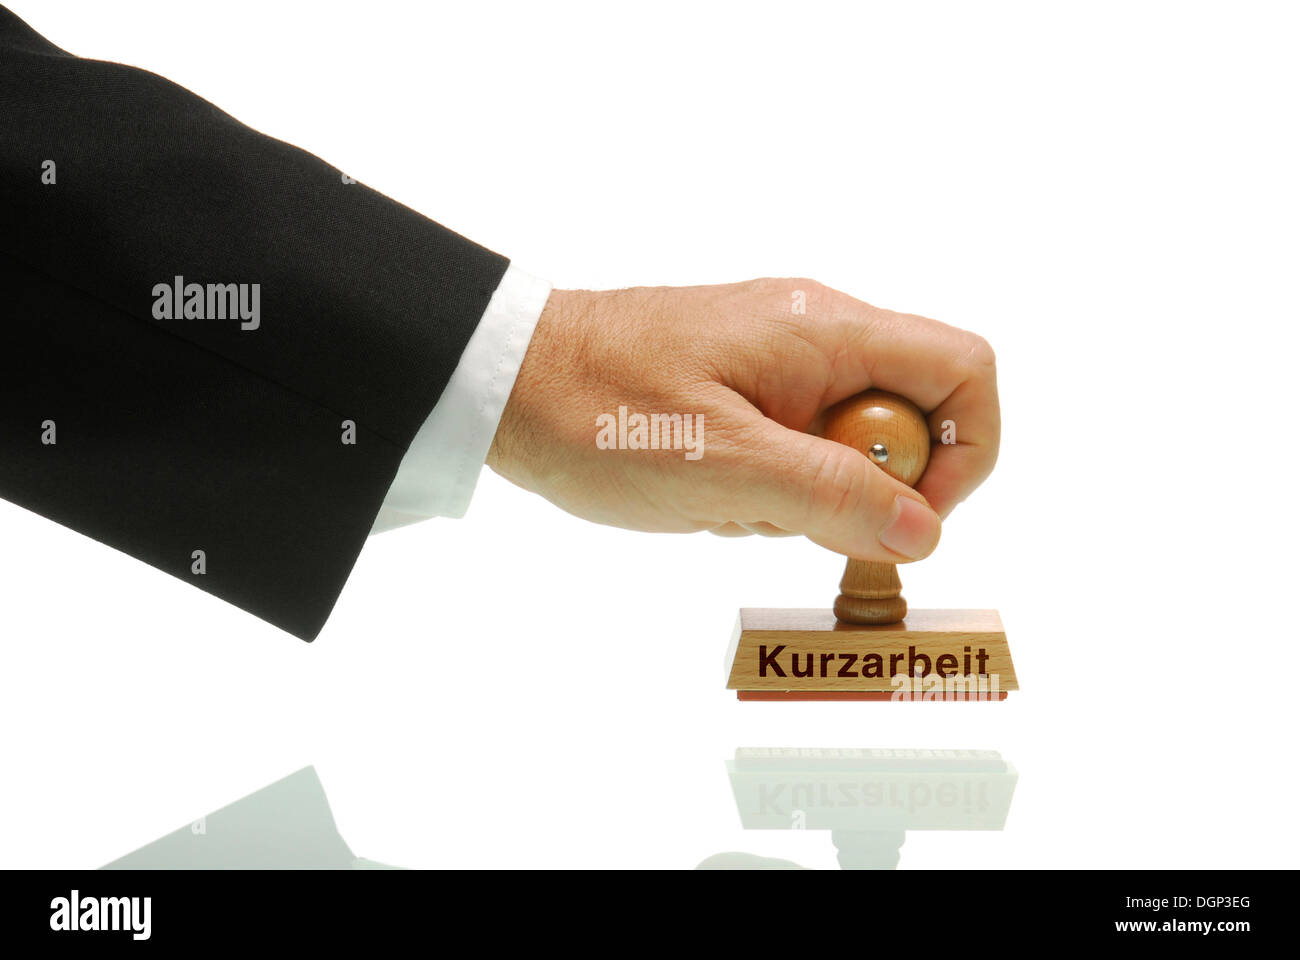 Manager hand holding a stamp labelled Kurzarbeit, German for short-time work Stock Photo